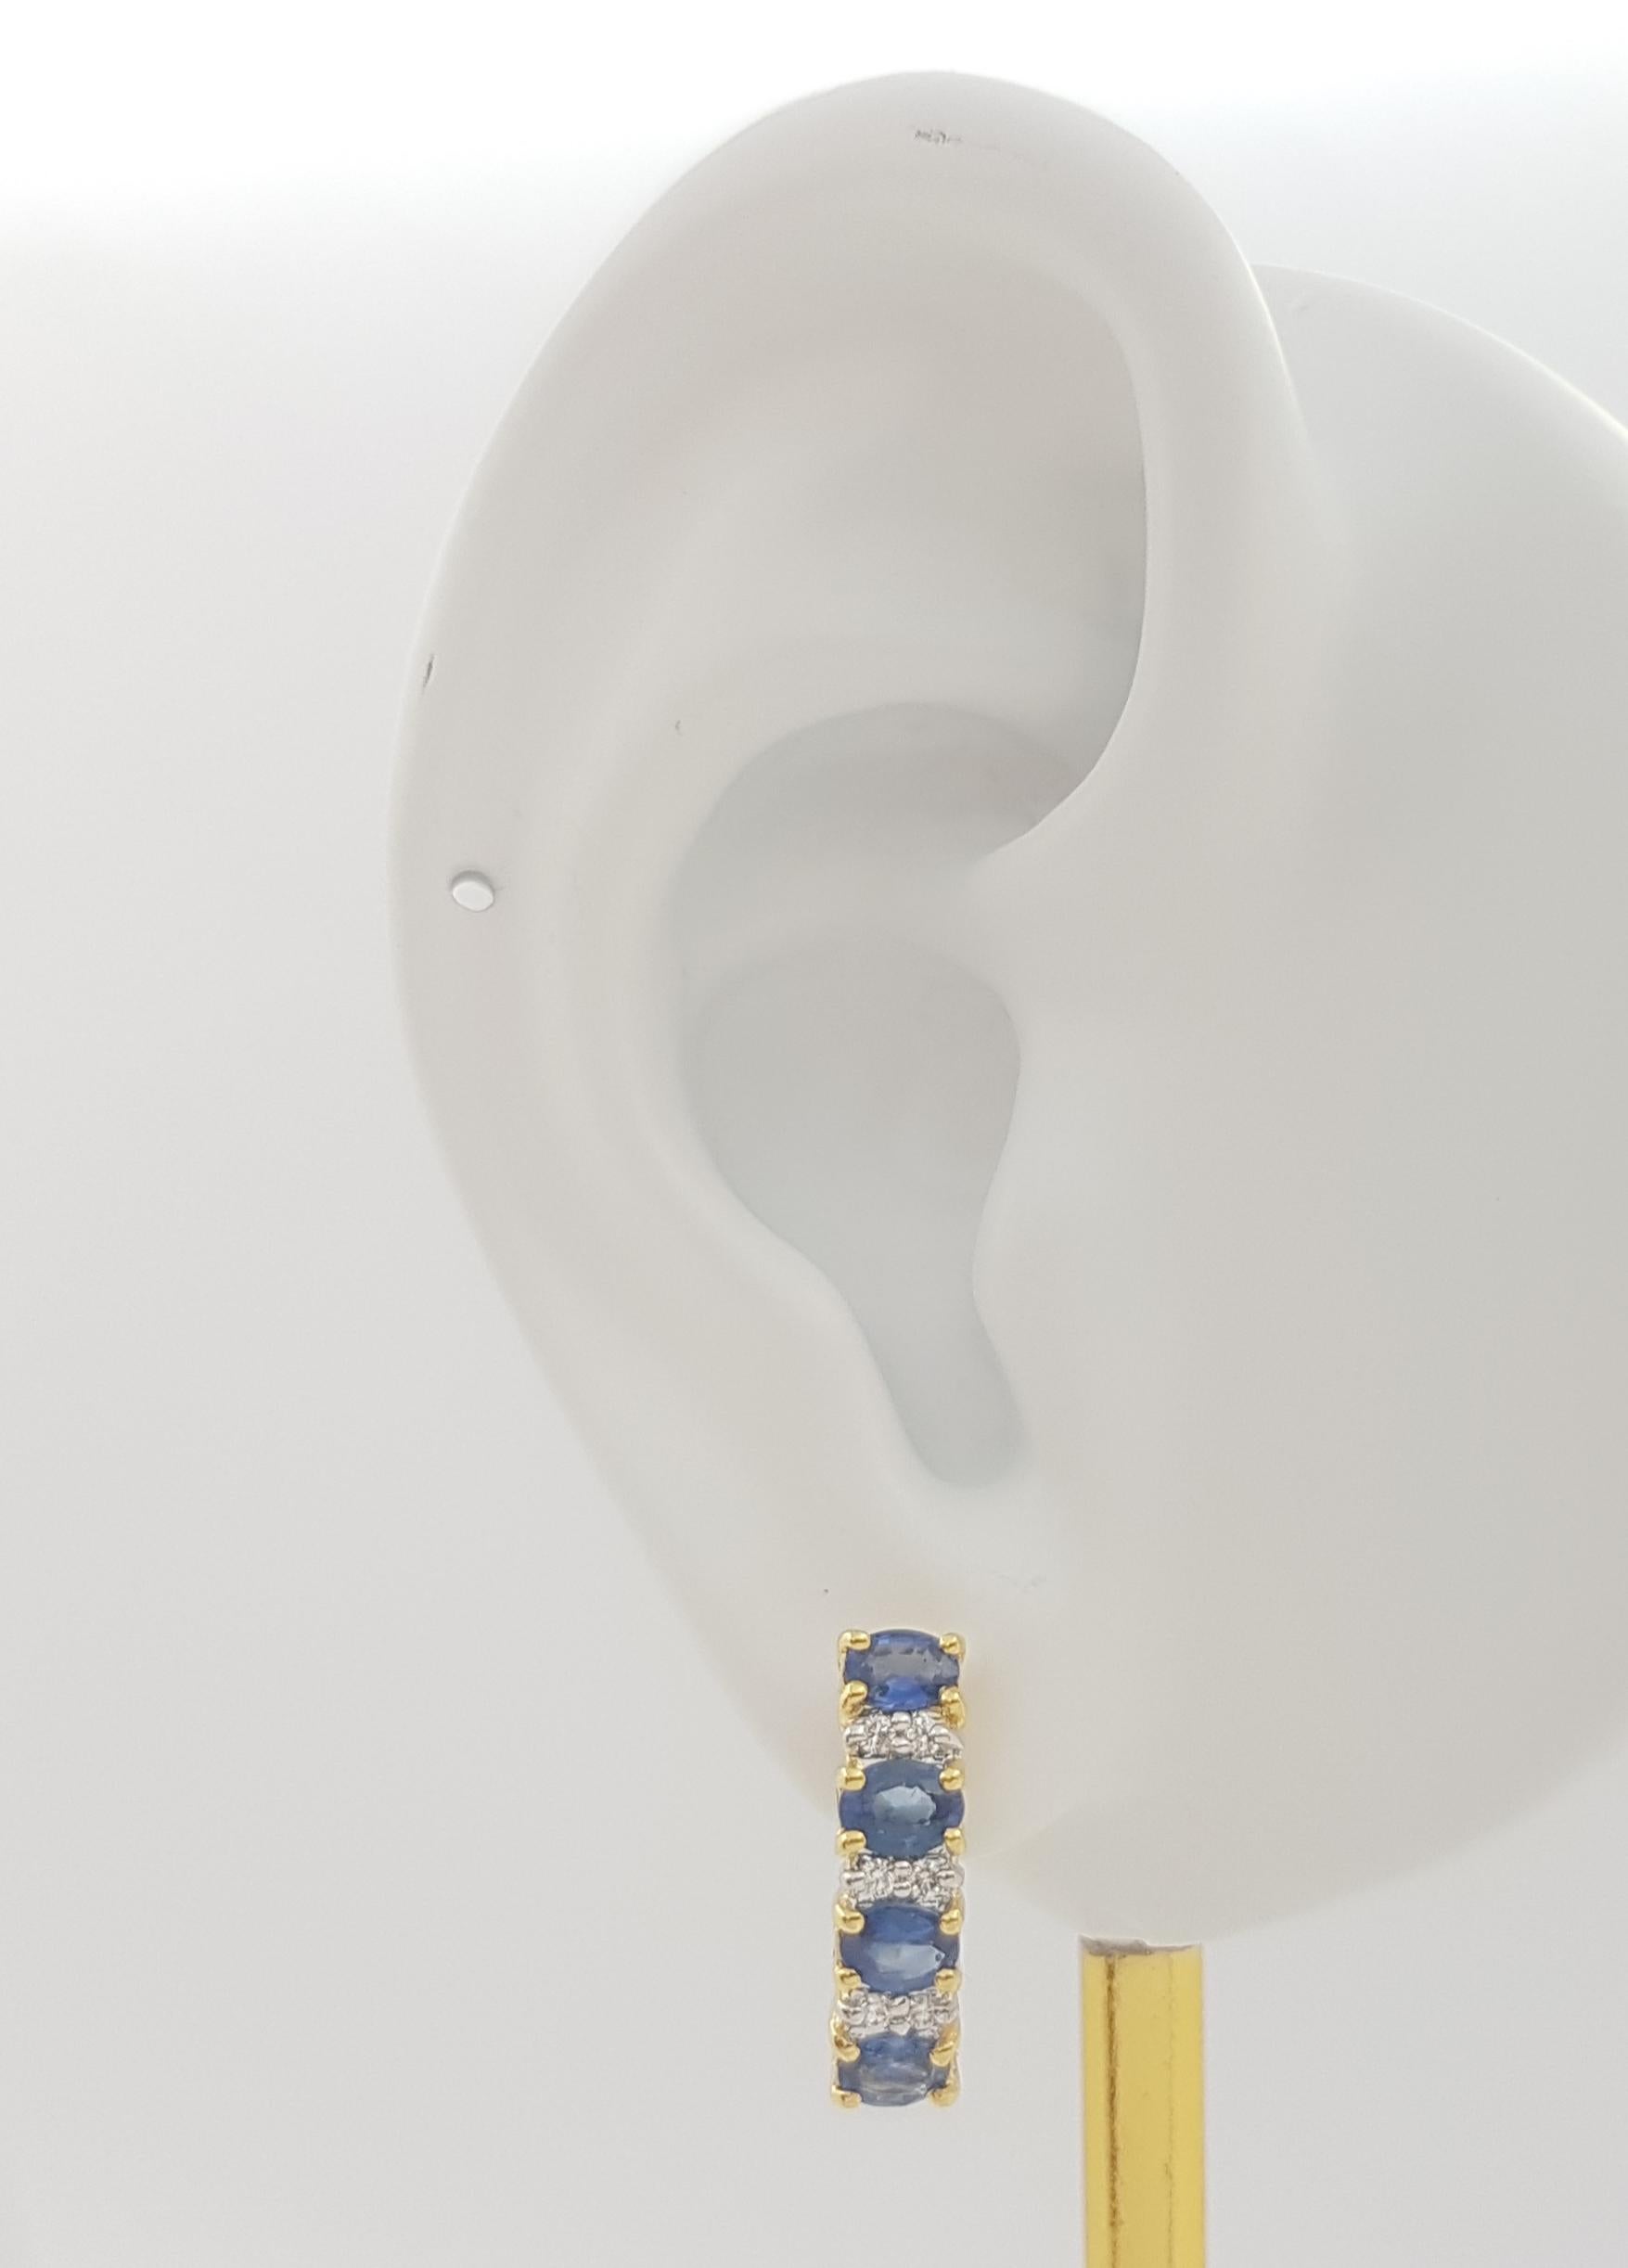 Blue Sapphire 1.75 carats with Diamond 0.10 carat Earrings set in 18K Gold Settings

Width: 0.4 cm 
Length: 1.6 cm
Total Weight: 4.17 grams

